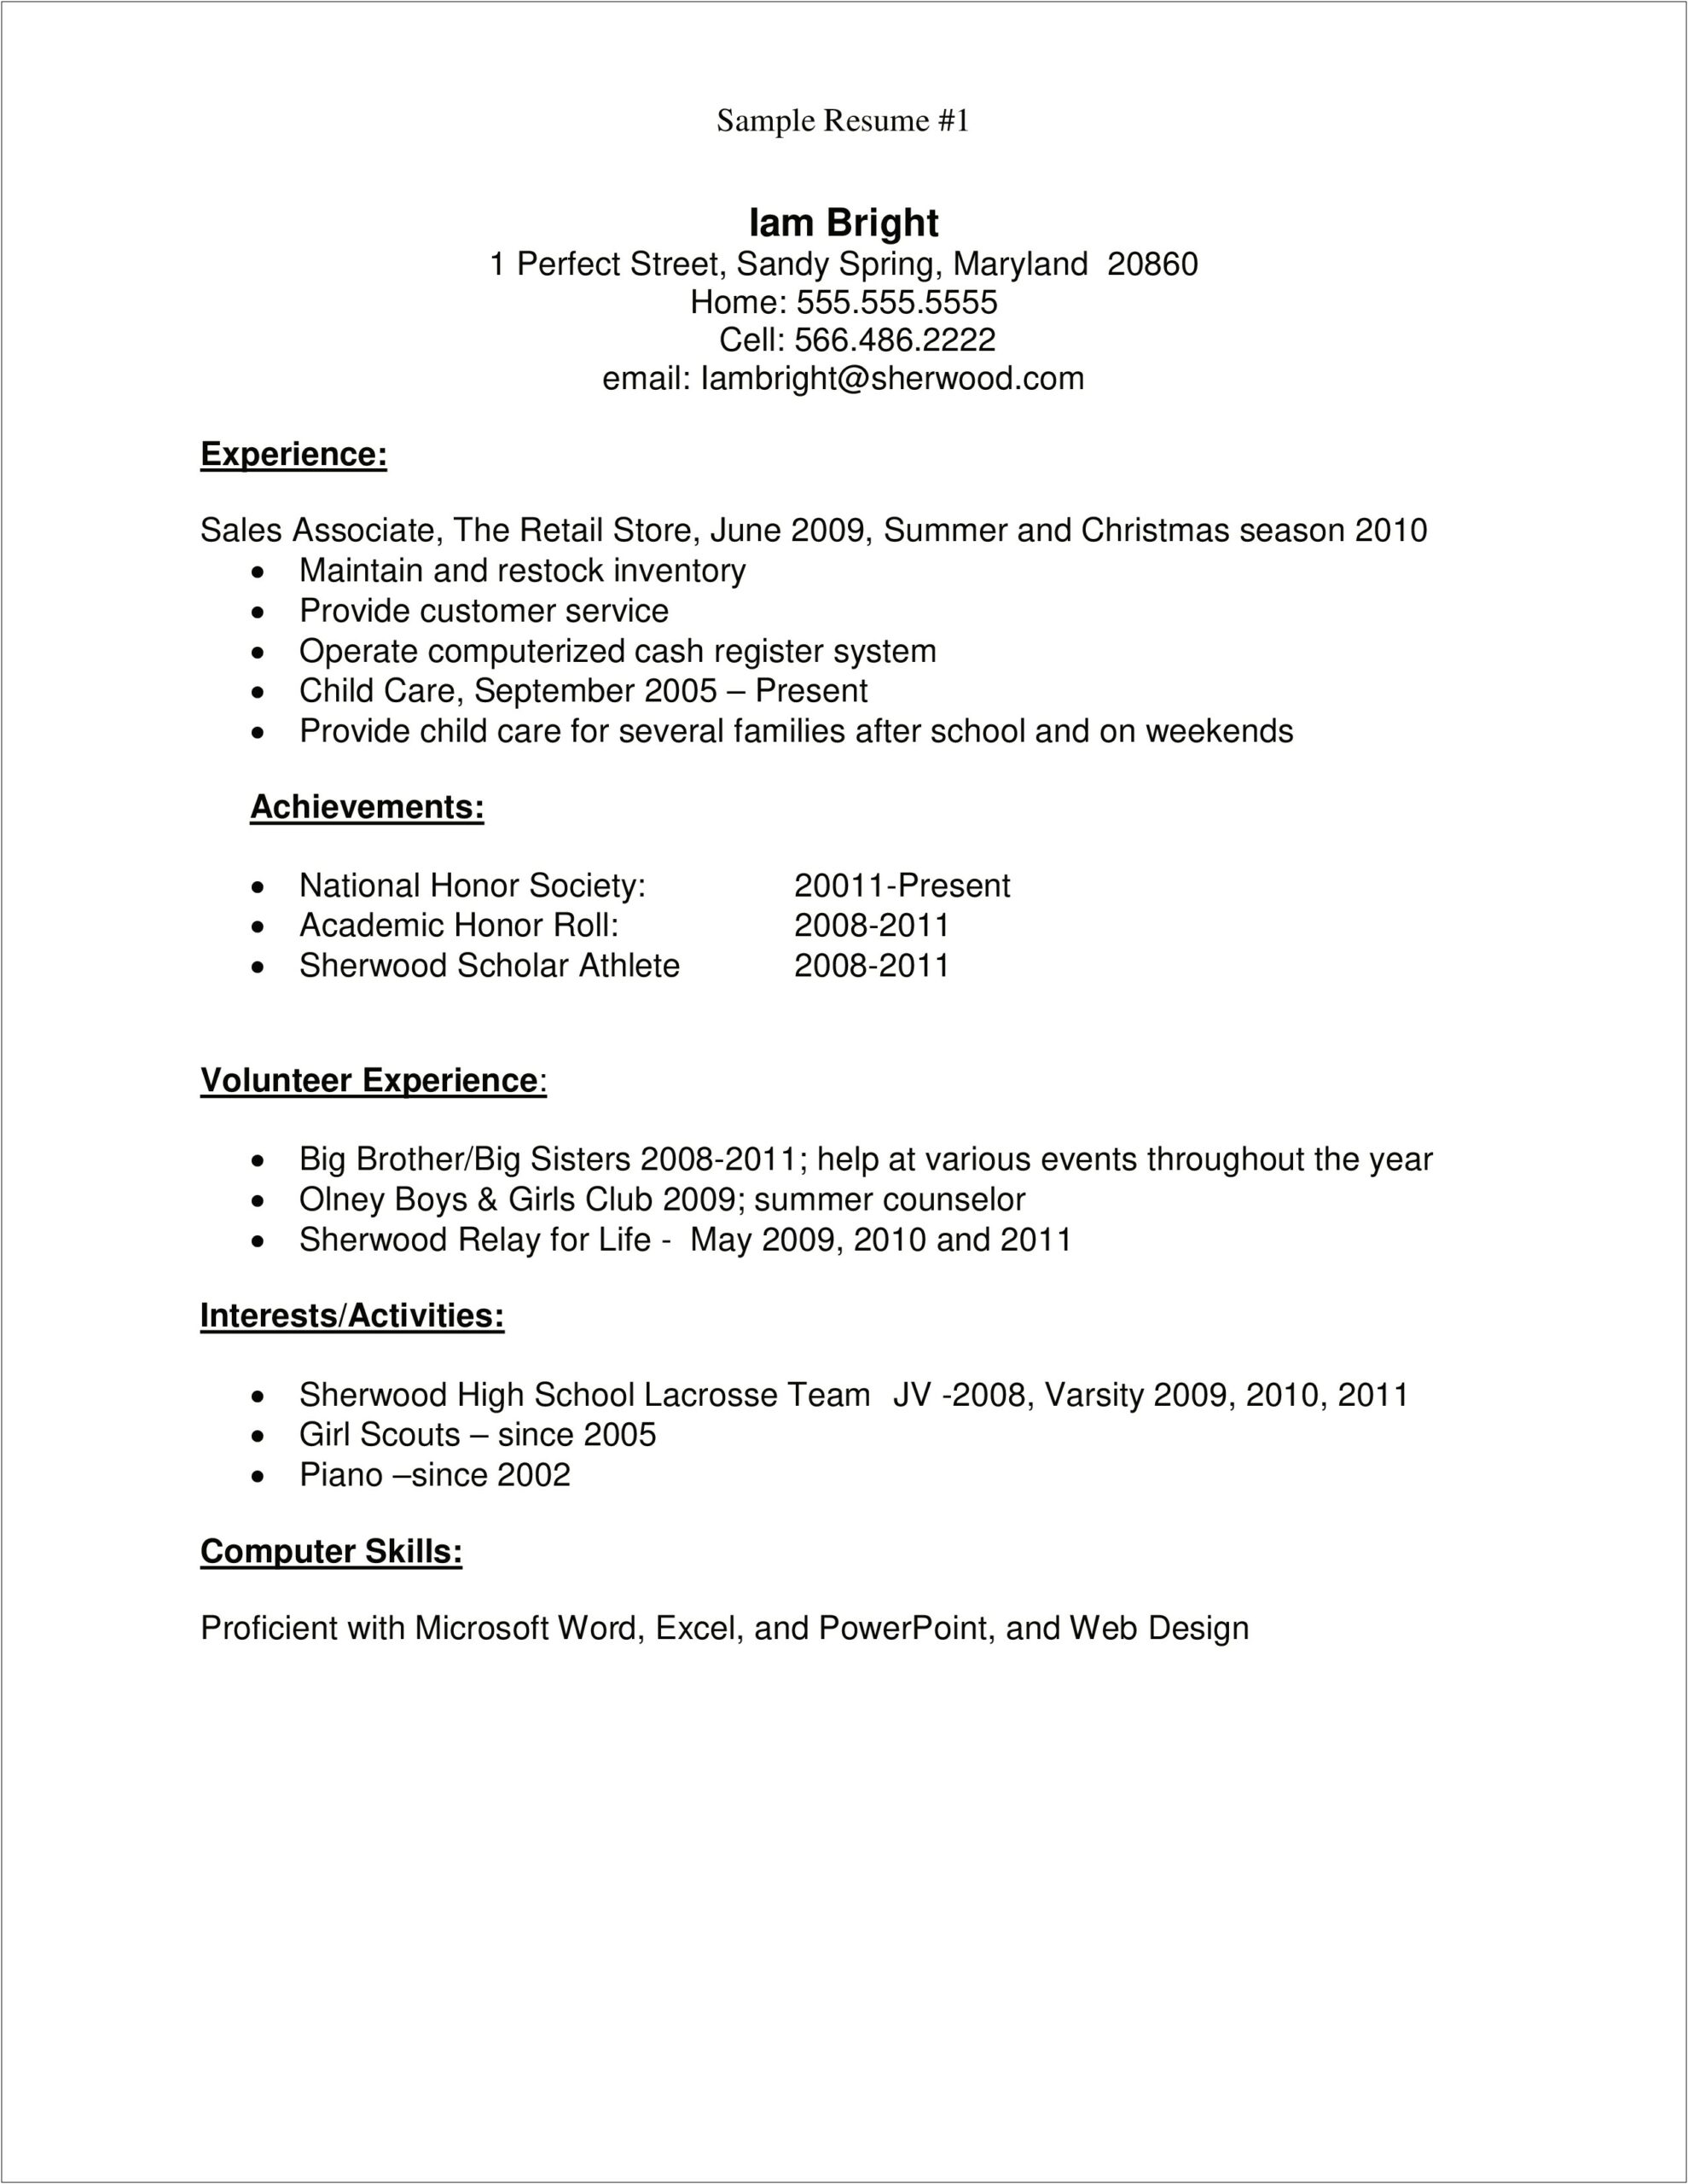 Job Resume For Sales Associate Examples